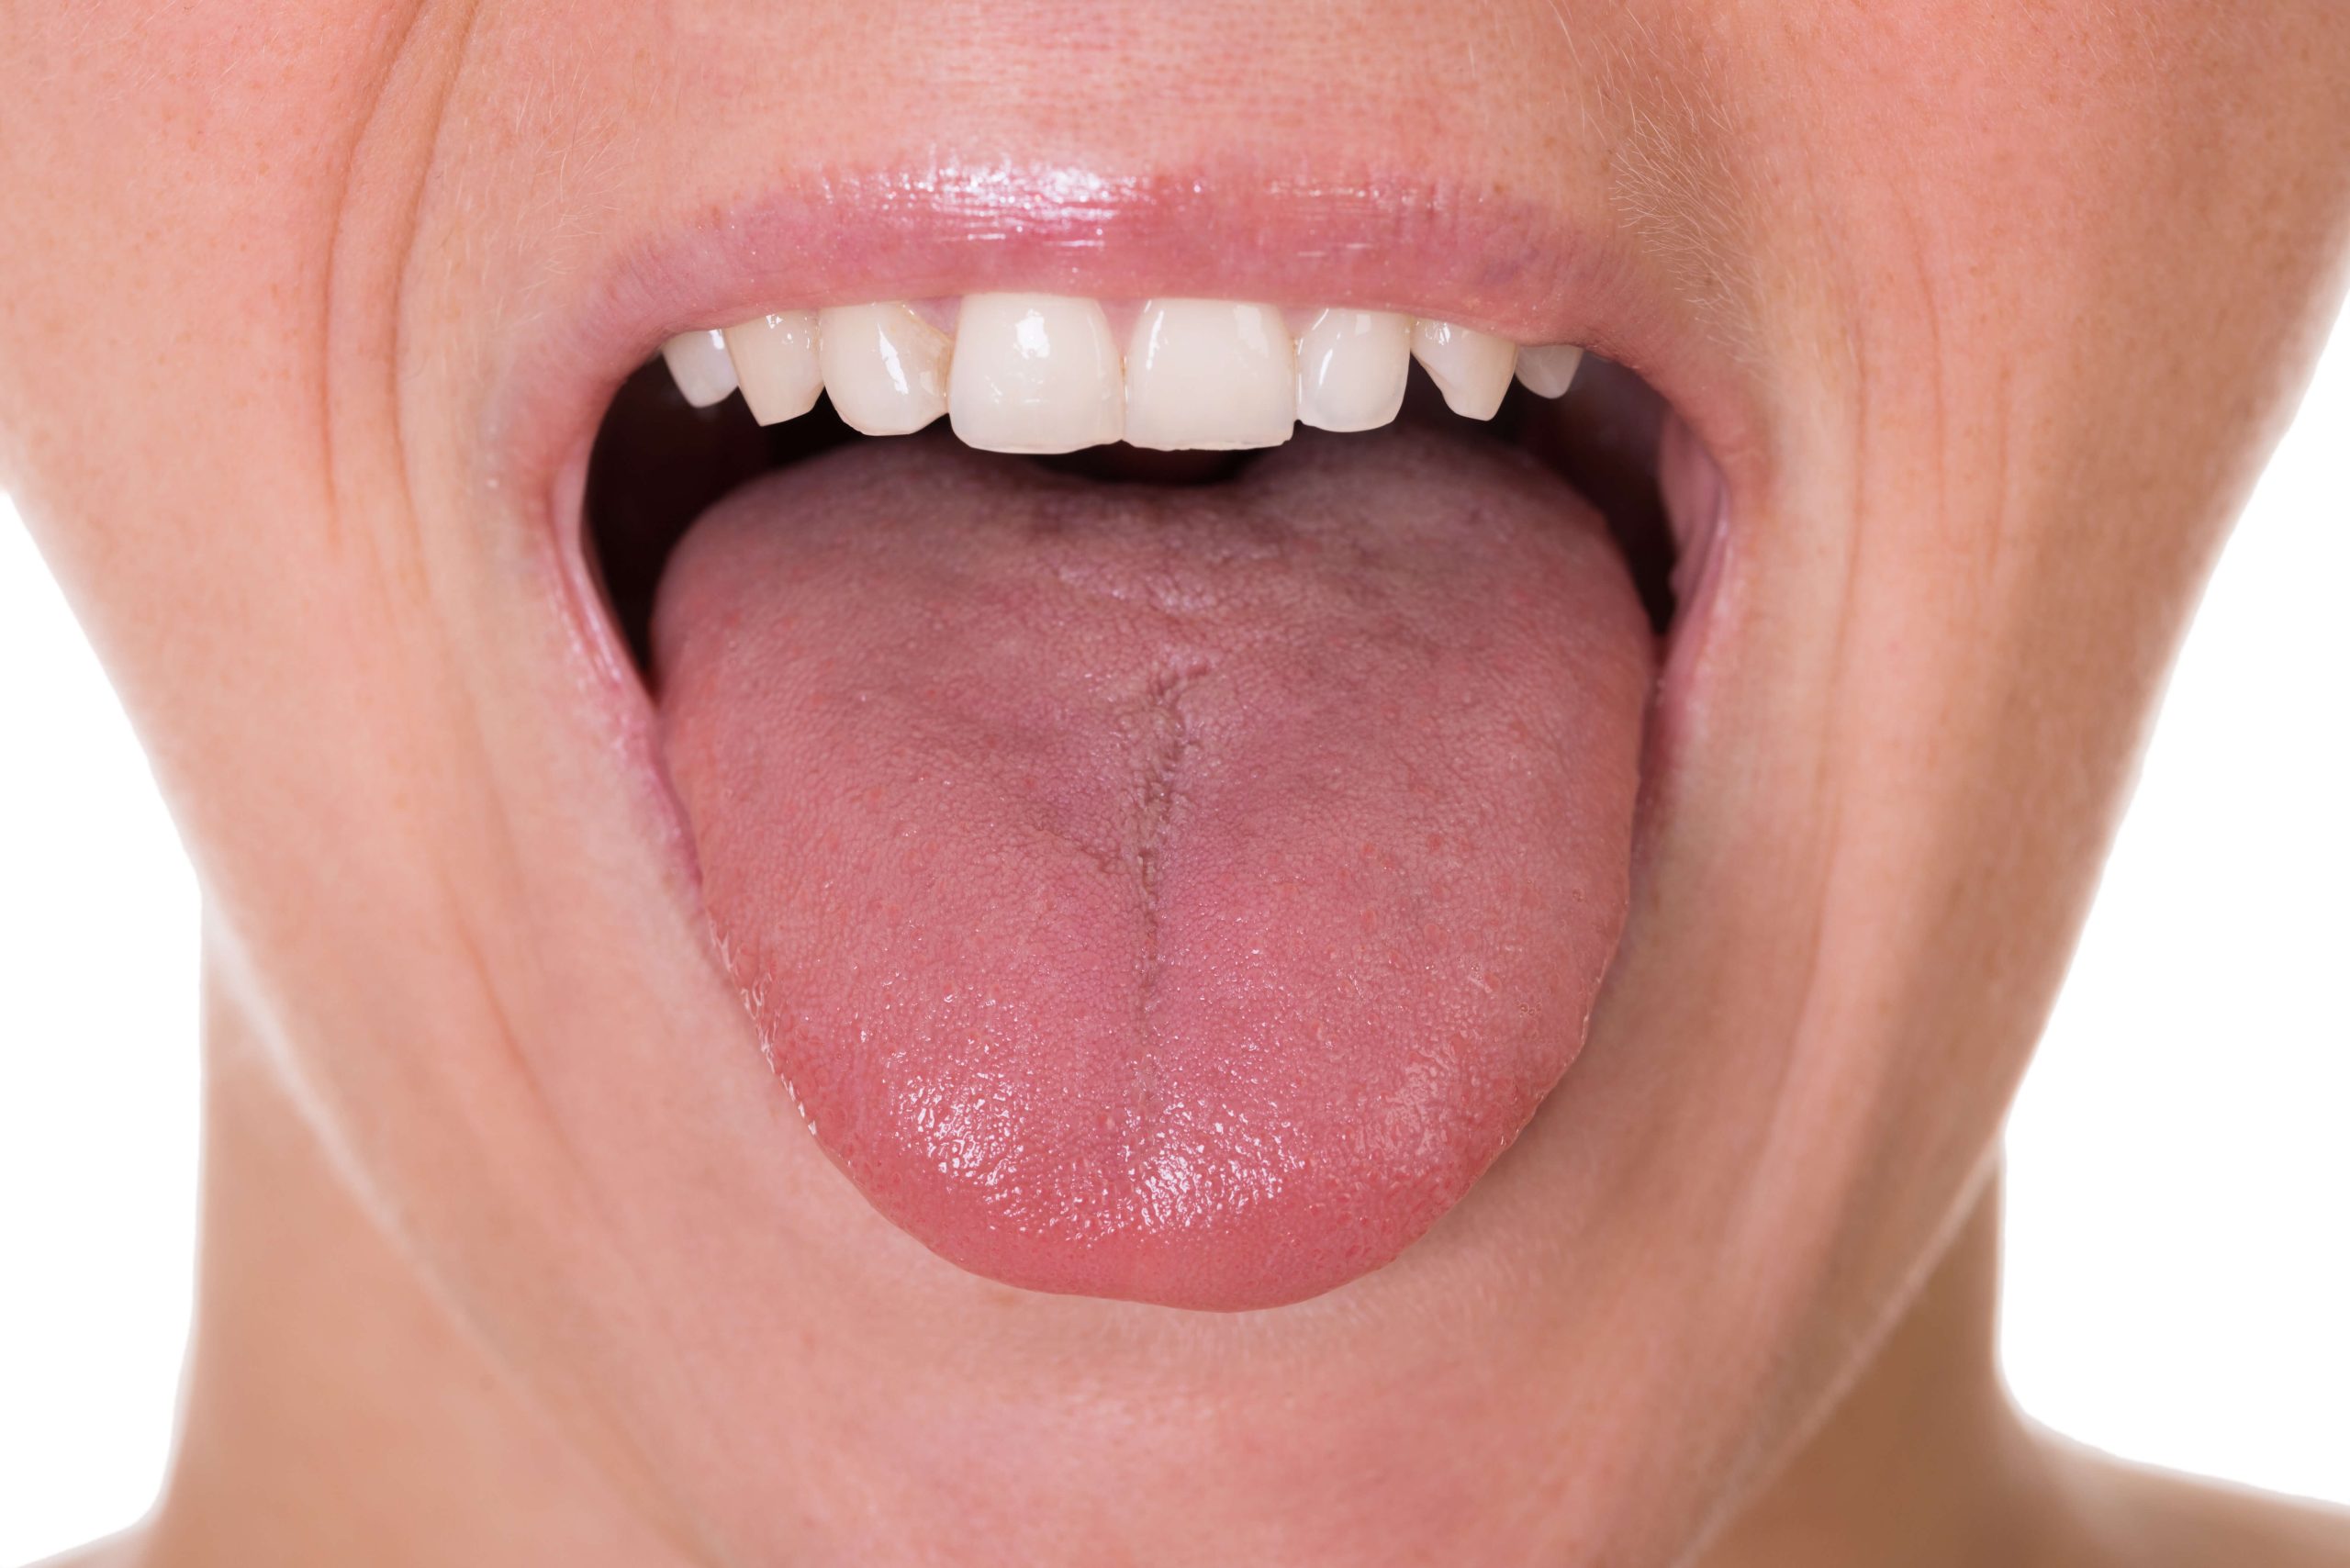 Tongue Function & Health Issues: Part 1